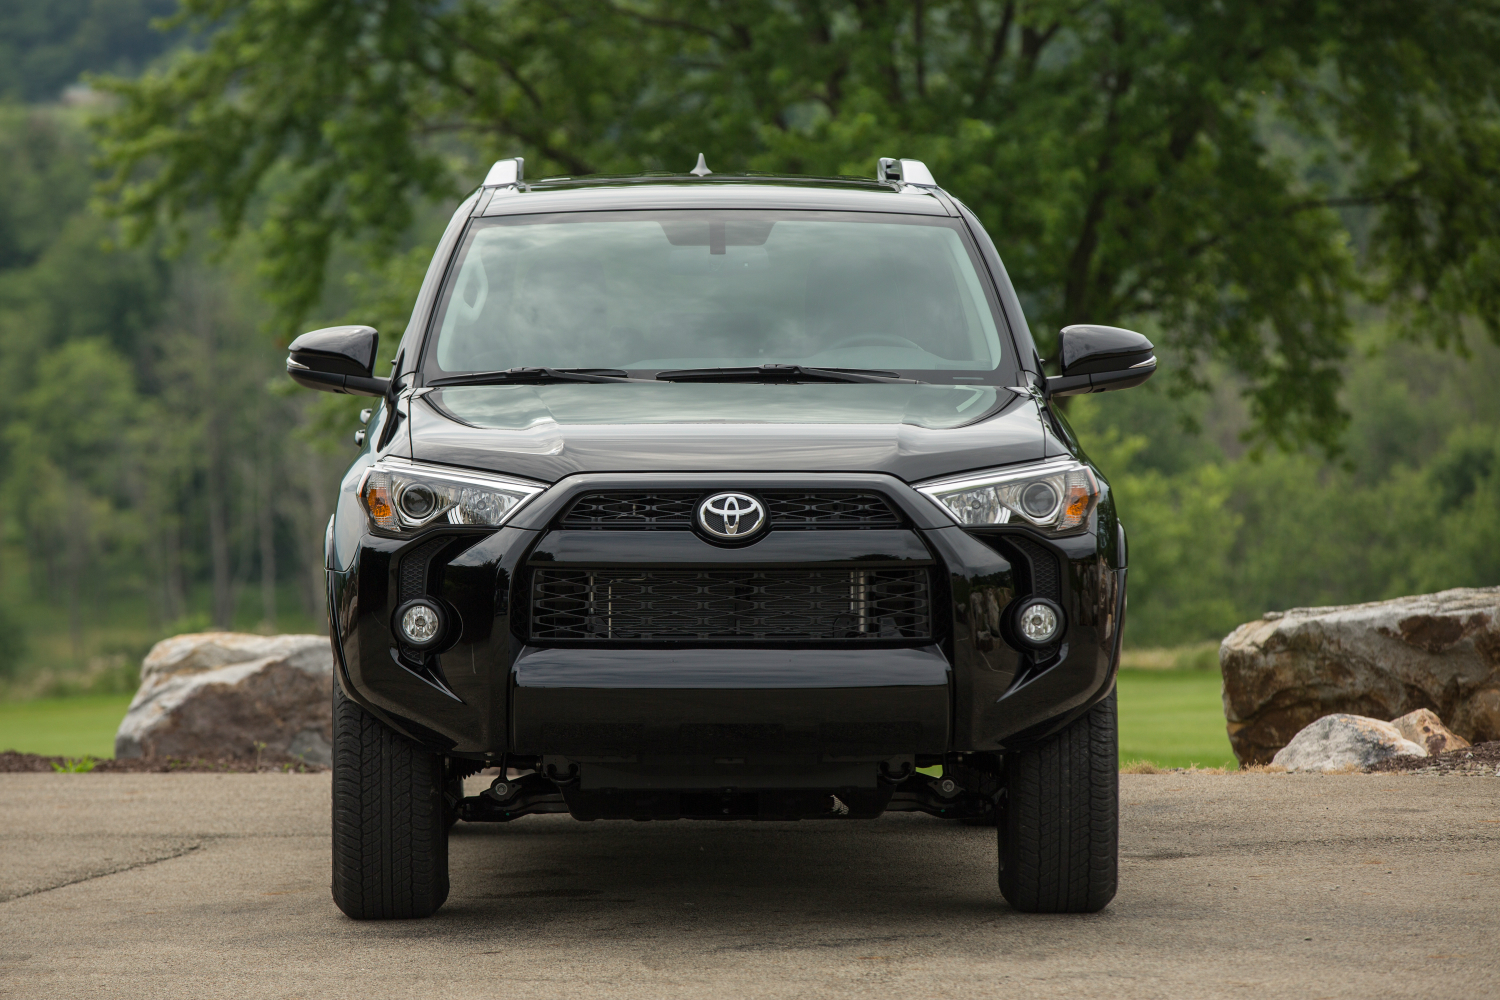 2018 toyota 4runner specs release date price performance 06